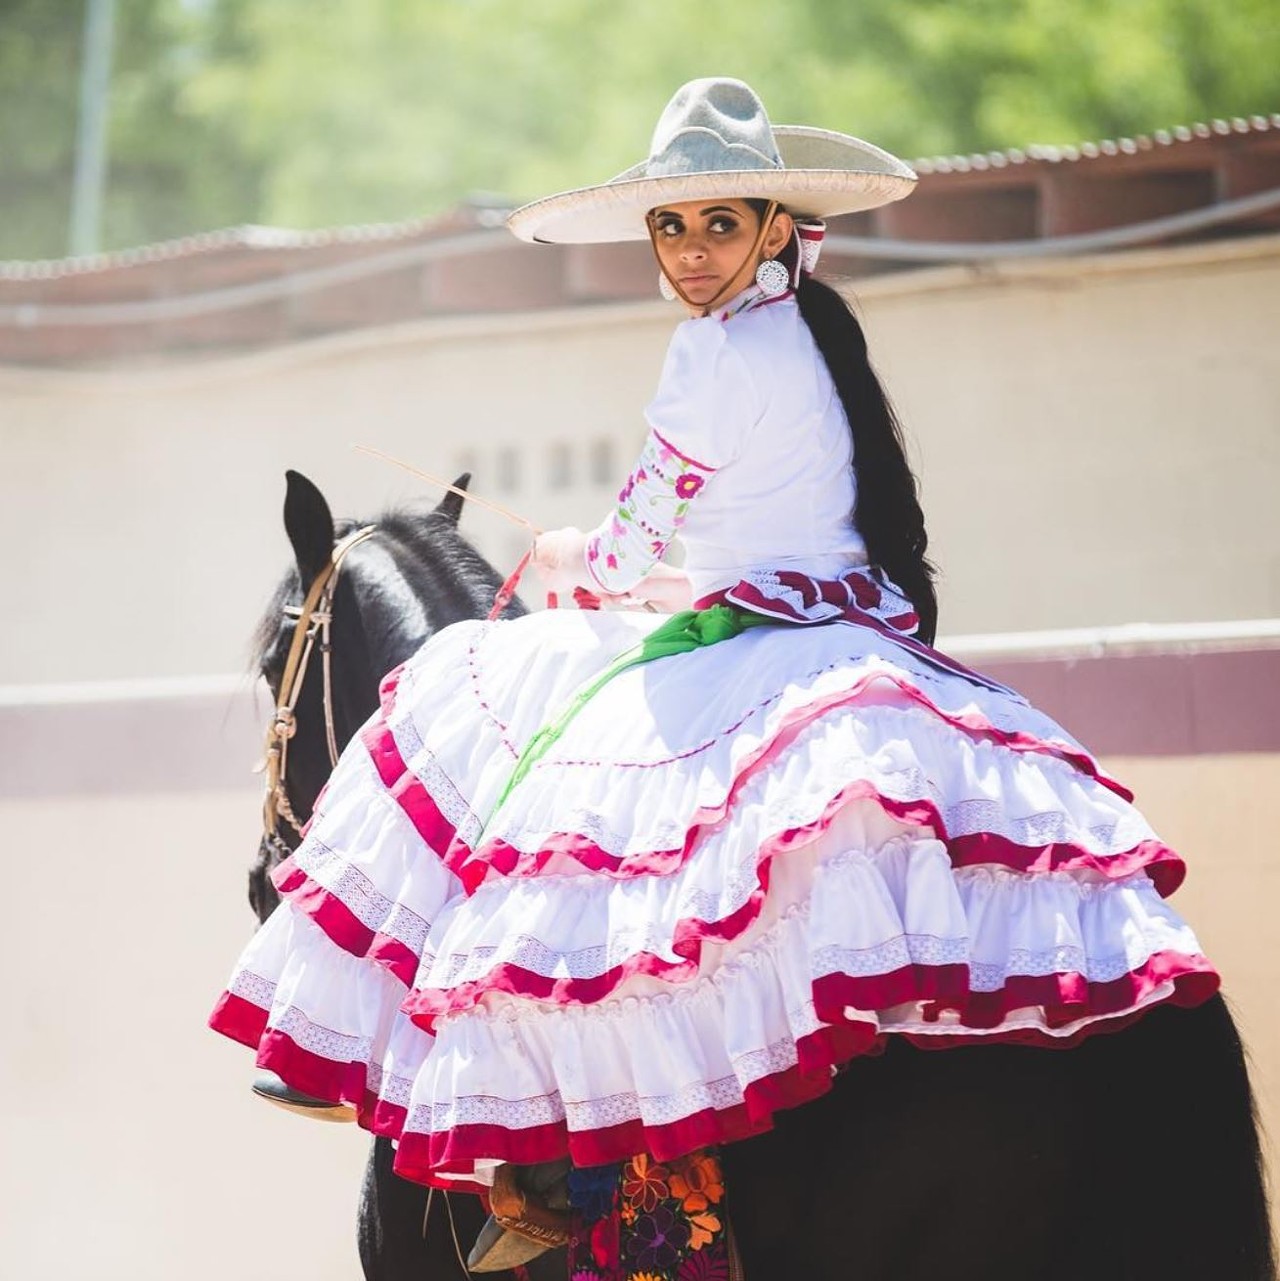 A Day in Old Mexico & Charreada
$20, Sun. April 21 & 28, 3pm-6pm, 6126 Padre Dr, sacharros.org
For those who don’t know, charreada is like the grandfather of the modern rodeo (charros being Mexican horsemen). This Fiesta event happens twice this April, on the last two Sundays of the month. There will be vendors before the rodeo, with the website saying to expect about two hours of rodeo time, during which there will be several different events. 
Photo via Instagram / fiestasa